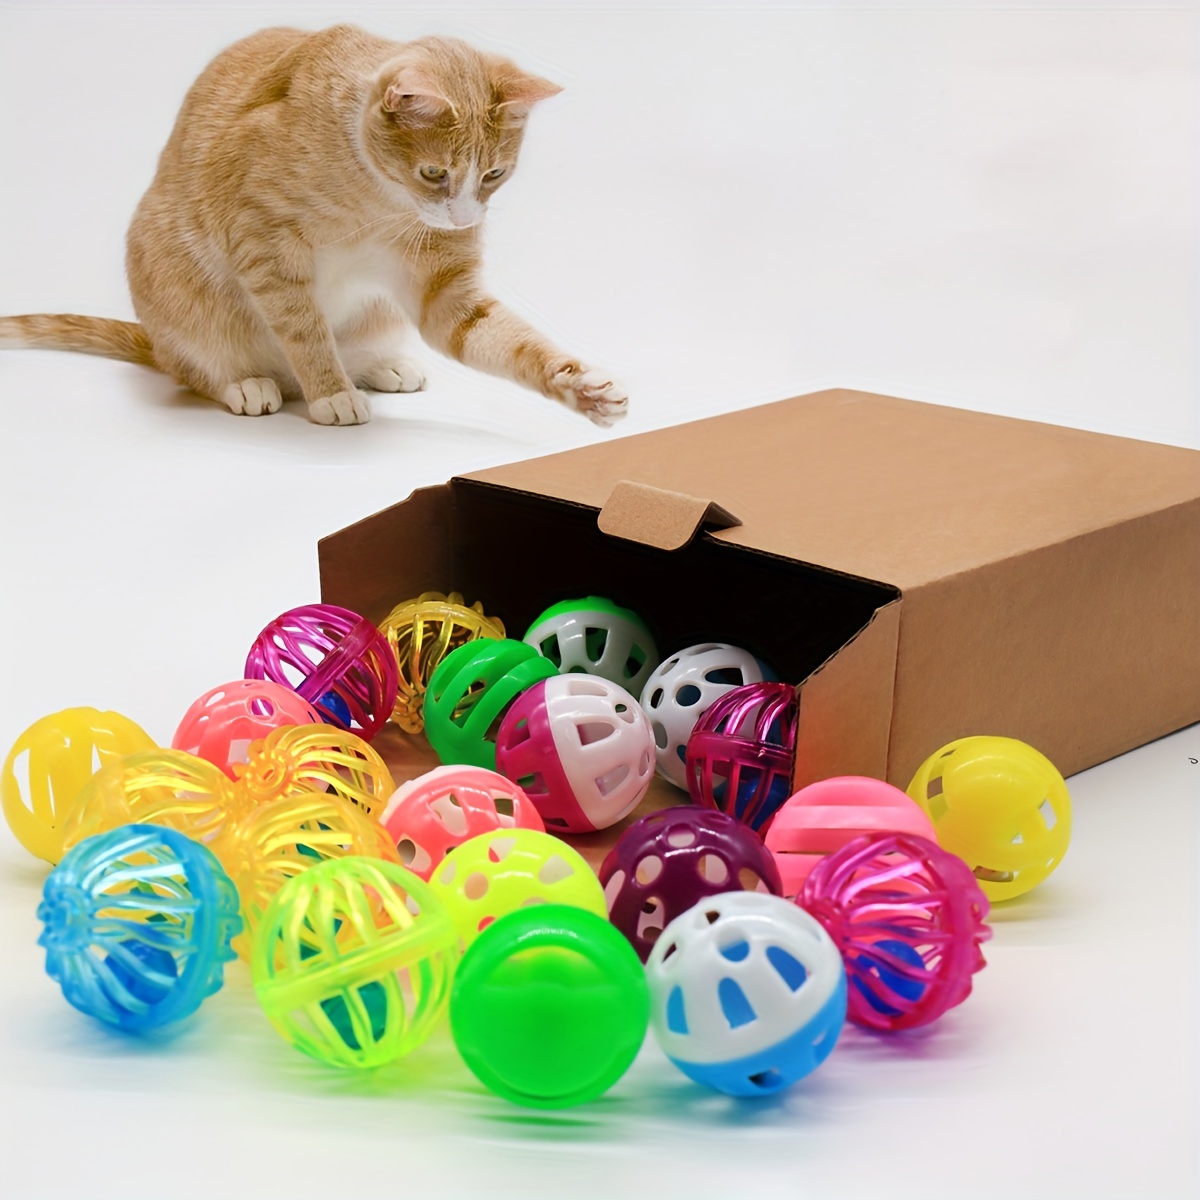 

24pcs/pack Random Color Cat Toy Set, Including Bell Ball, Suitable For Both Indoor And Outdoor Activities